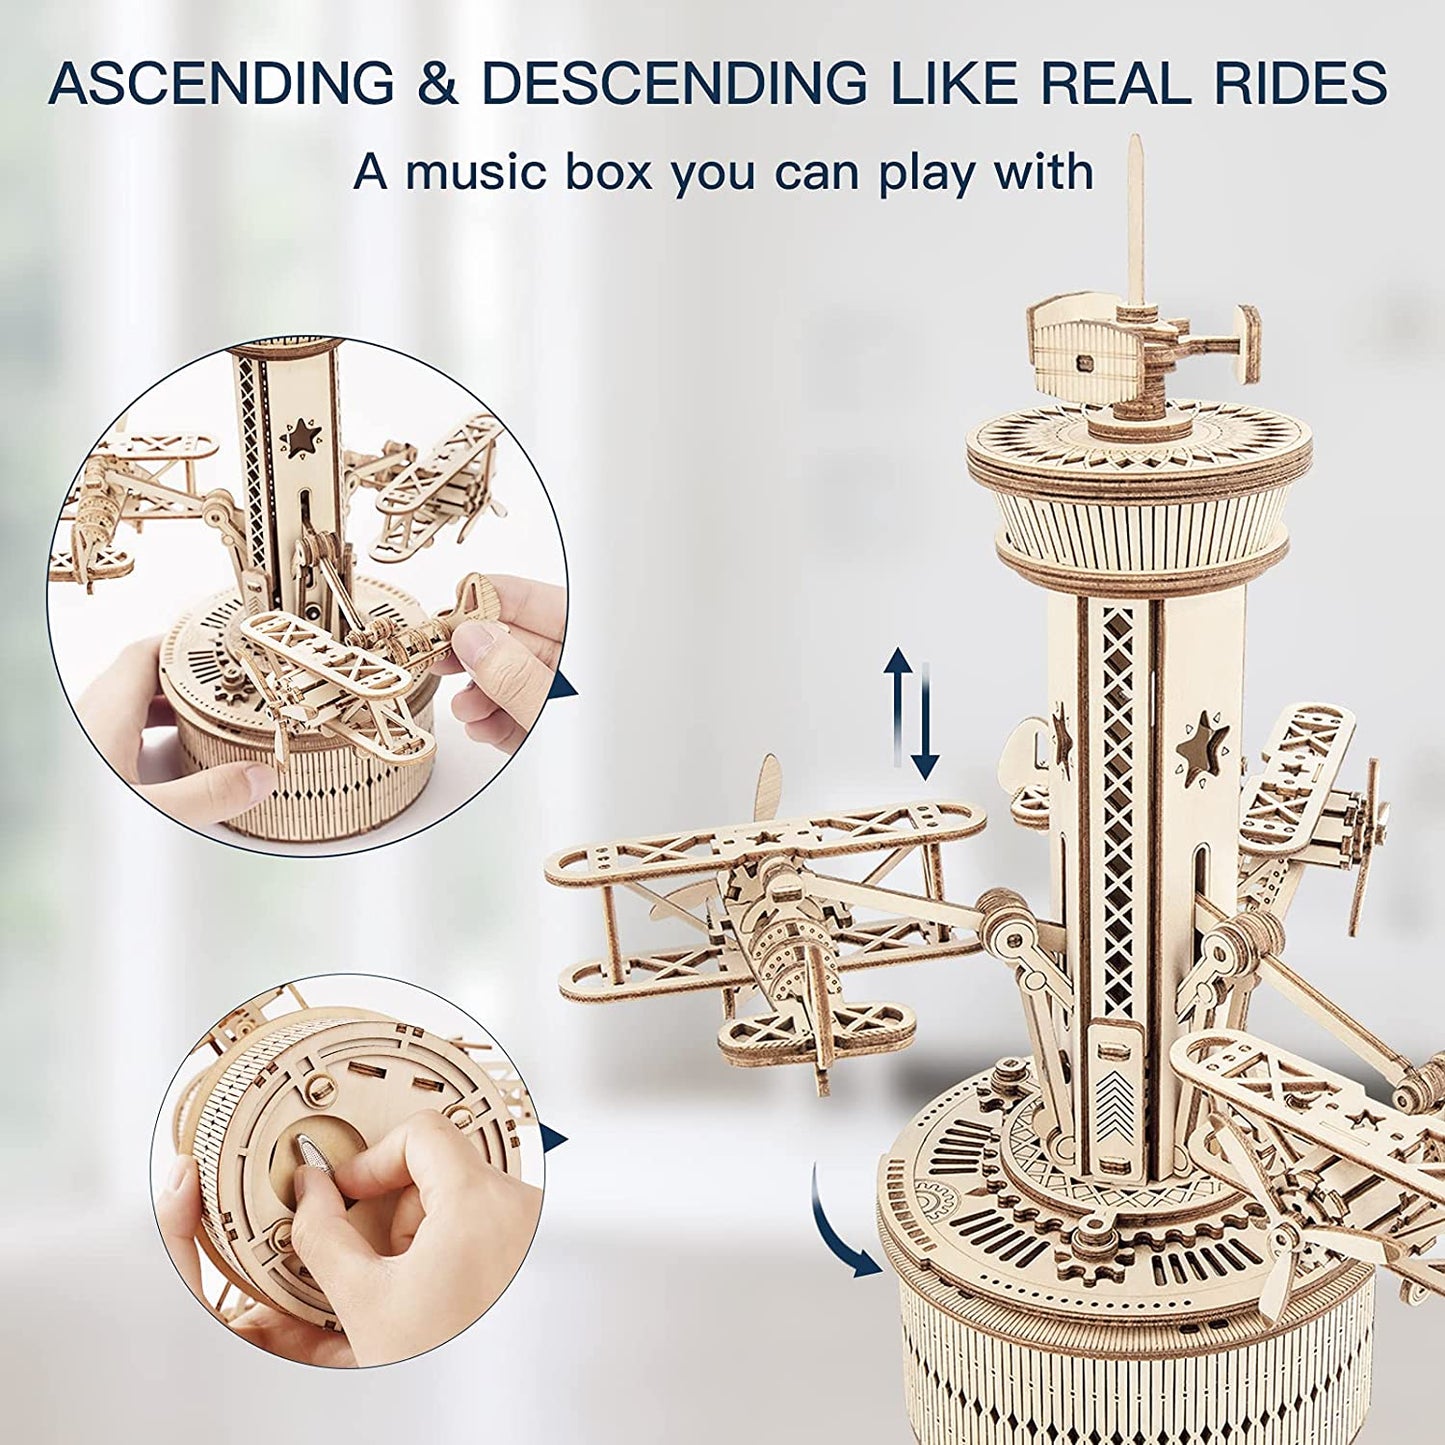 Robotime Rokr 3D Wooden Puzzles For Adults DIY Musical Box Model Kit To Build Self-Assembly Building Kit Airplane- Control Tower